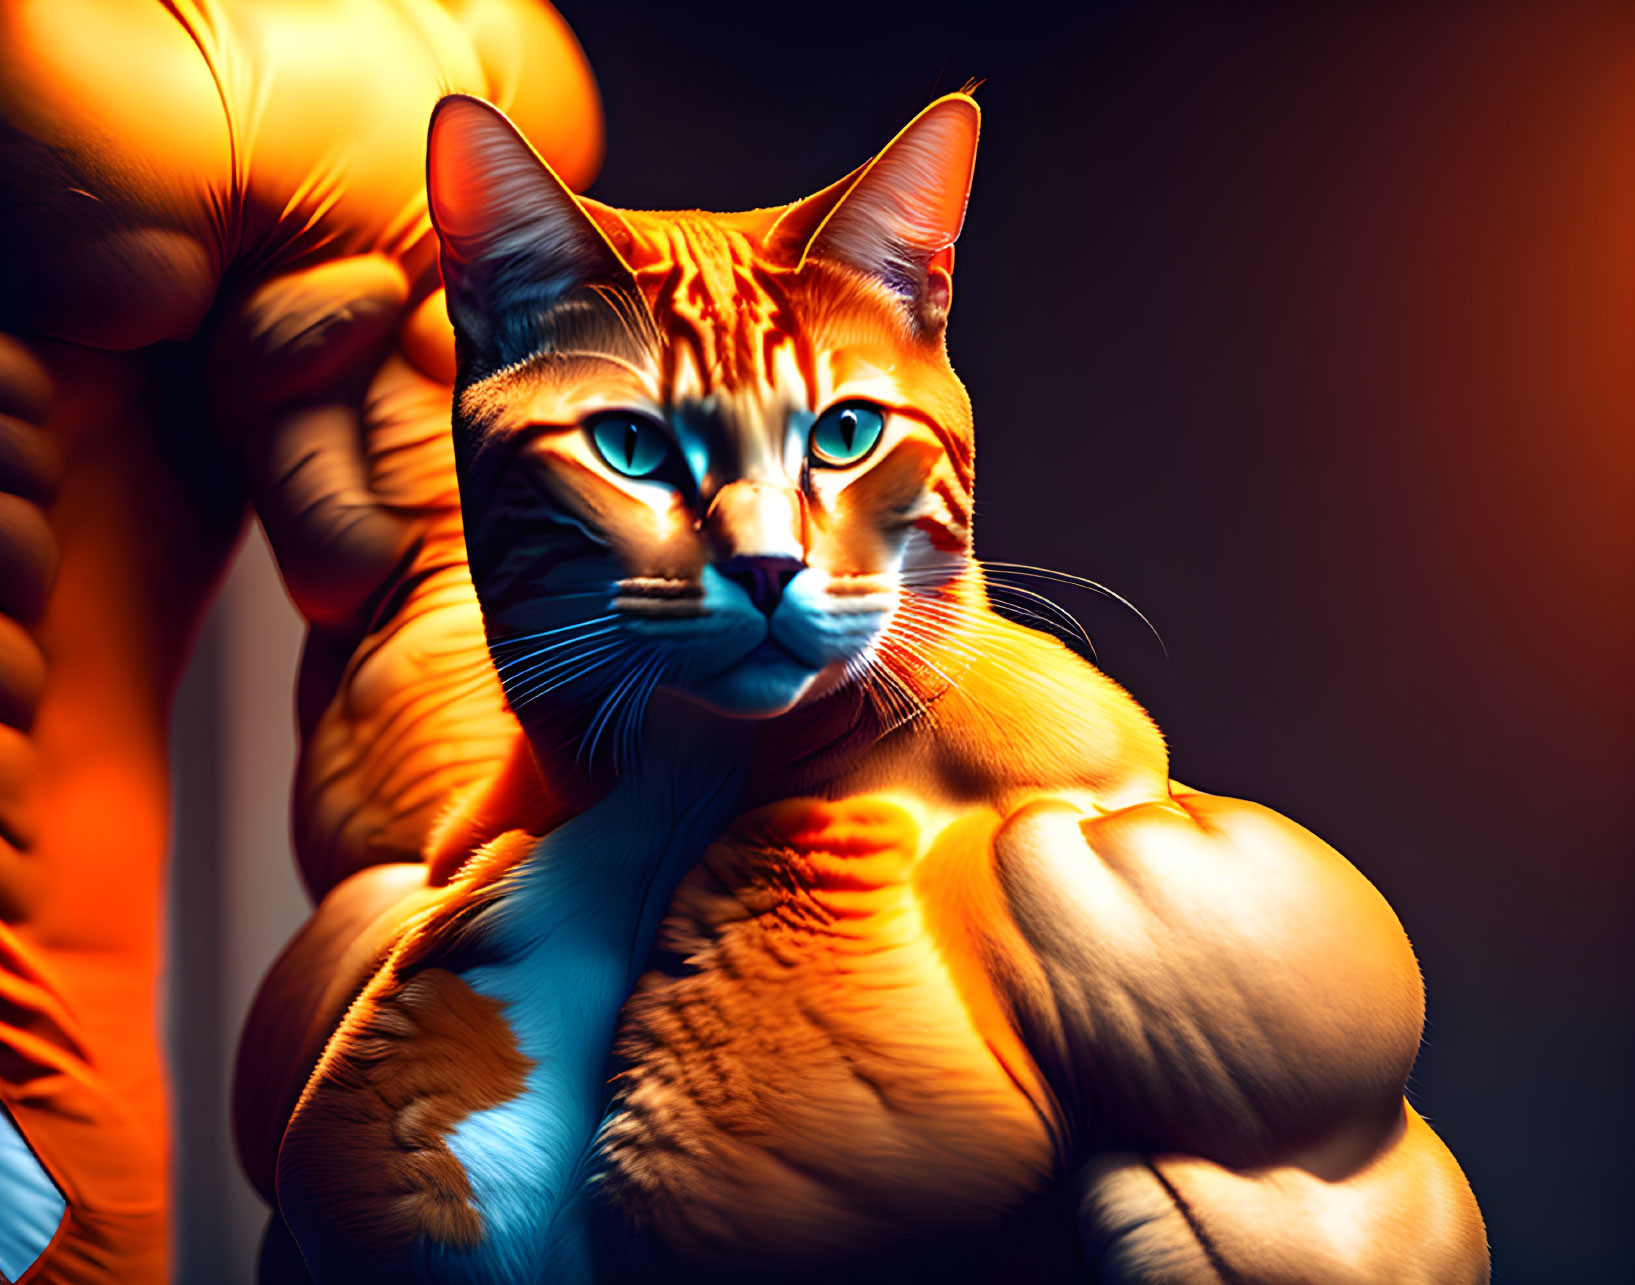 Muscular Orange Cat with Prominent Biceps and Confident Gaze